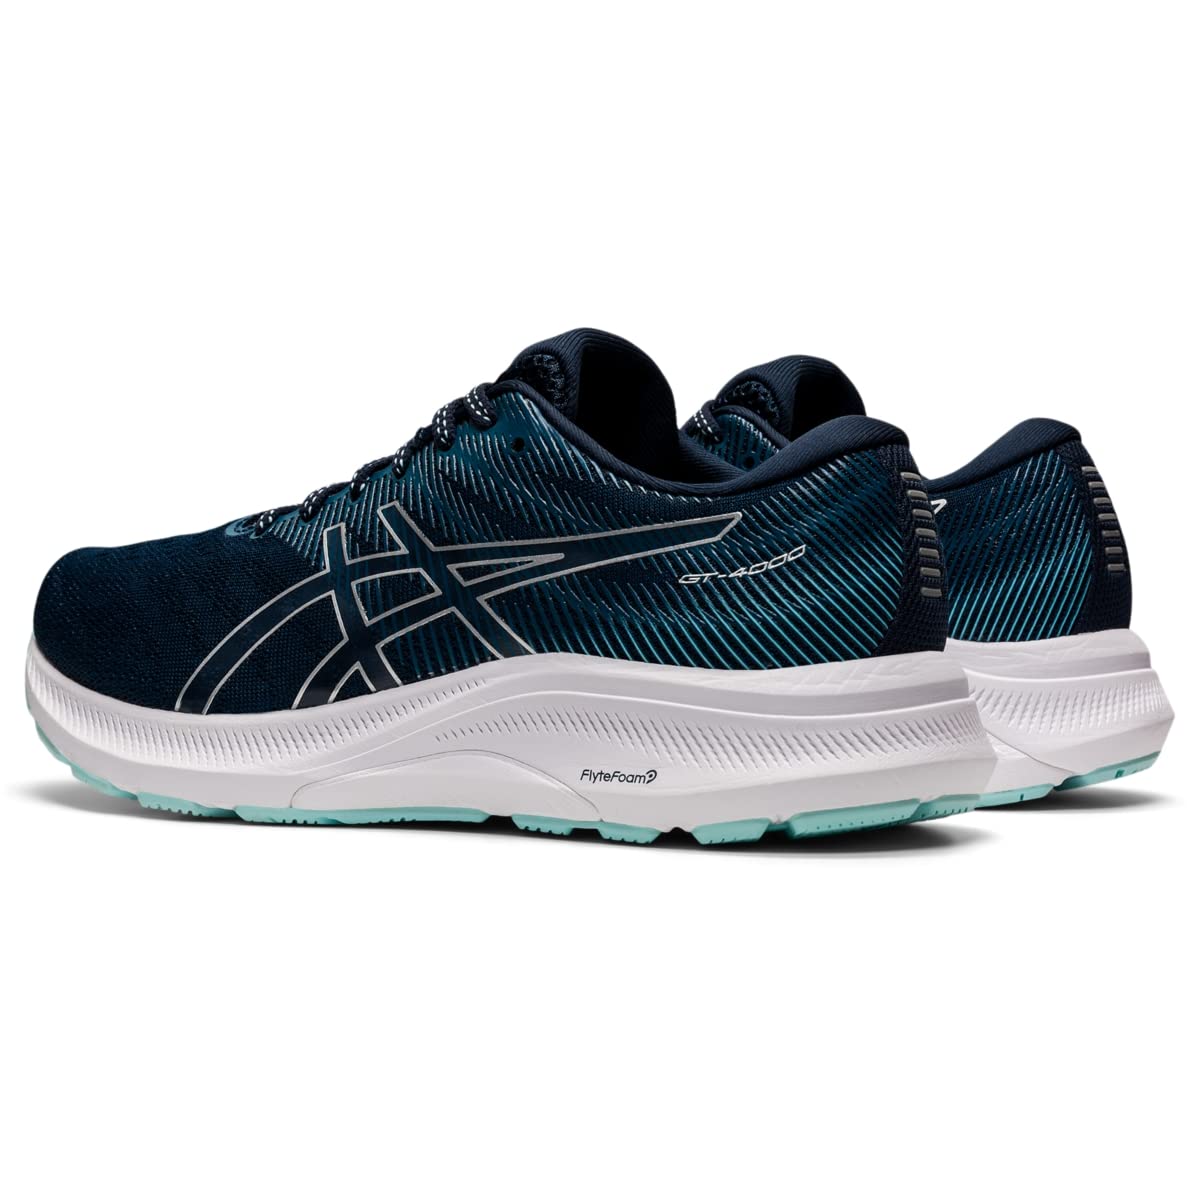 ASICS Women's GT-4000 3 Running Shoes, 7, French Blue/Pure Silver